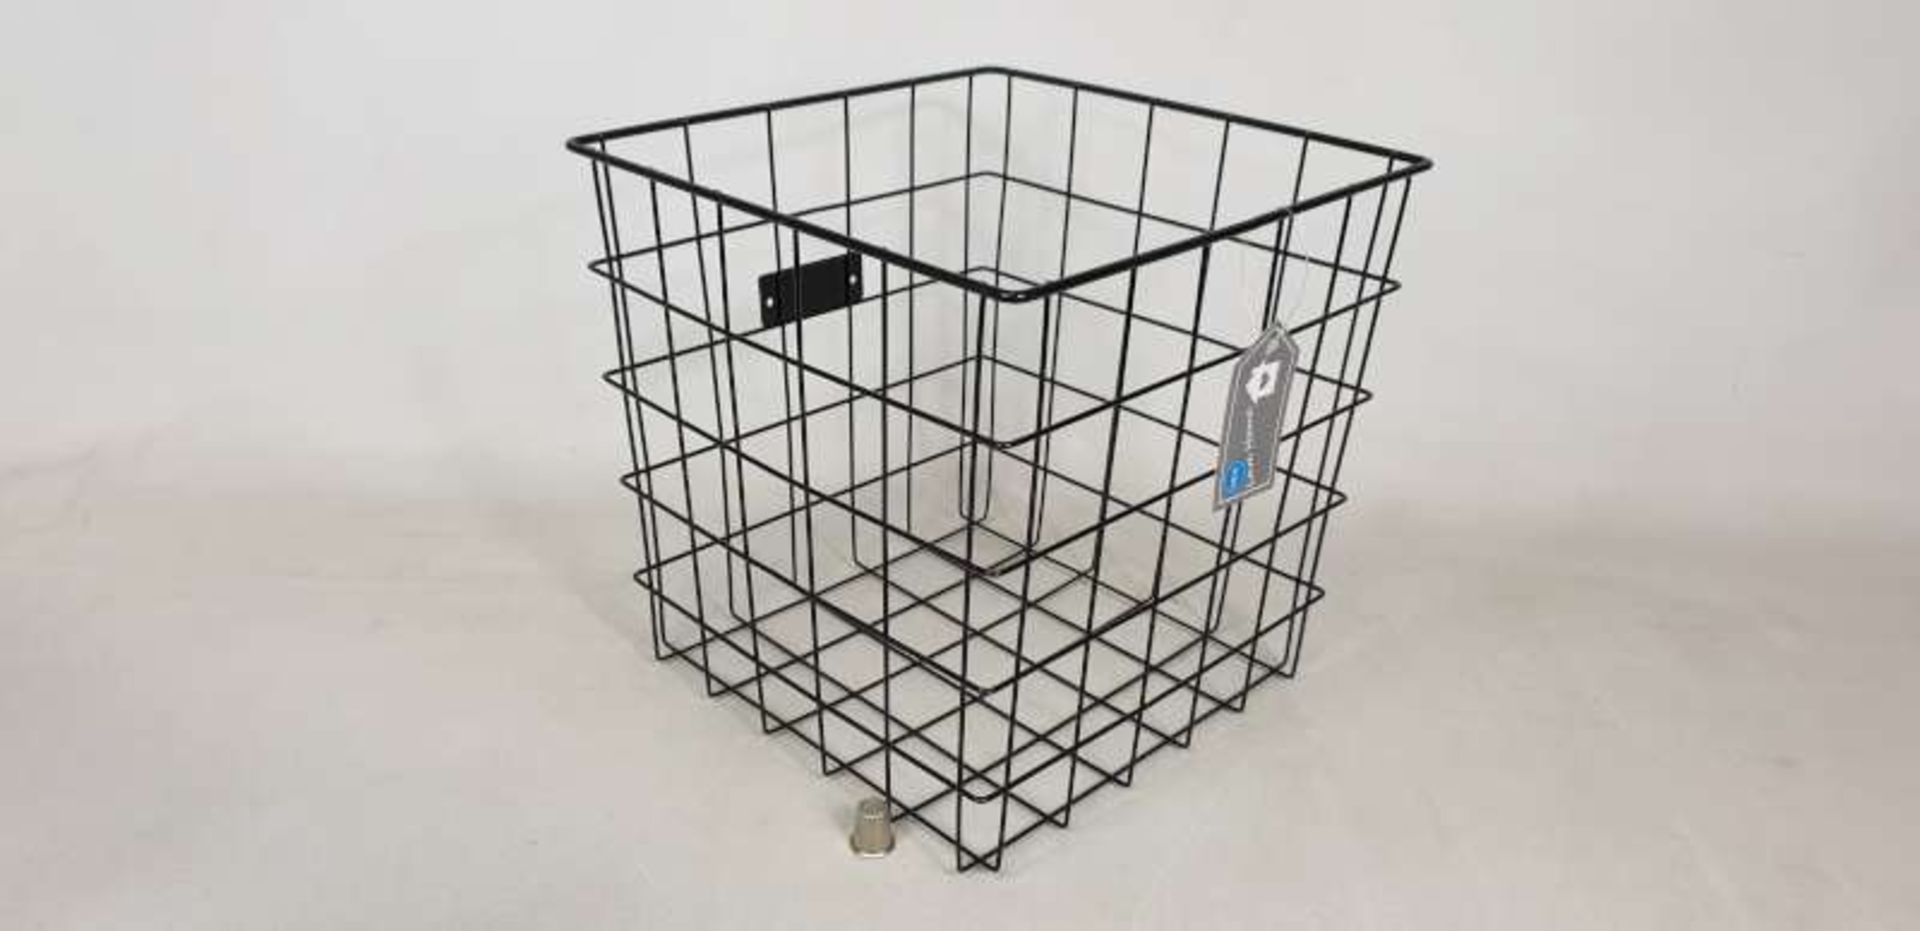 20 X BRAND NEW BOXED BLACK METAL STORAGE BASKETS IN 5 BOXES